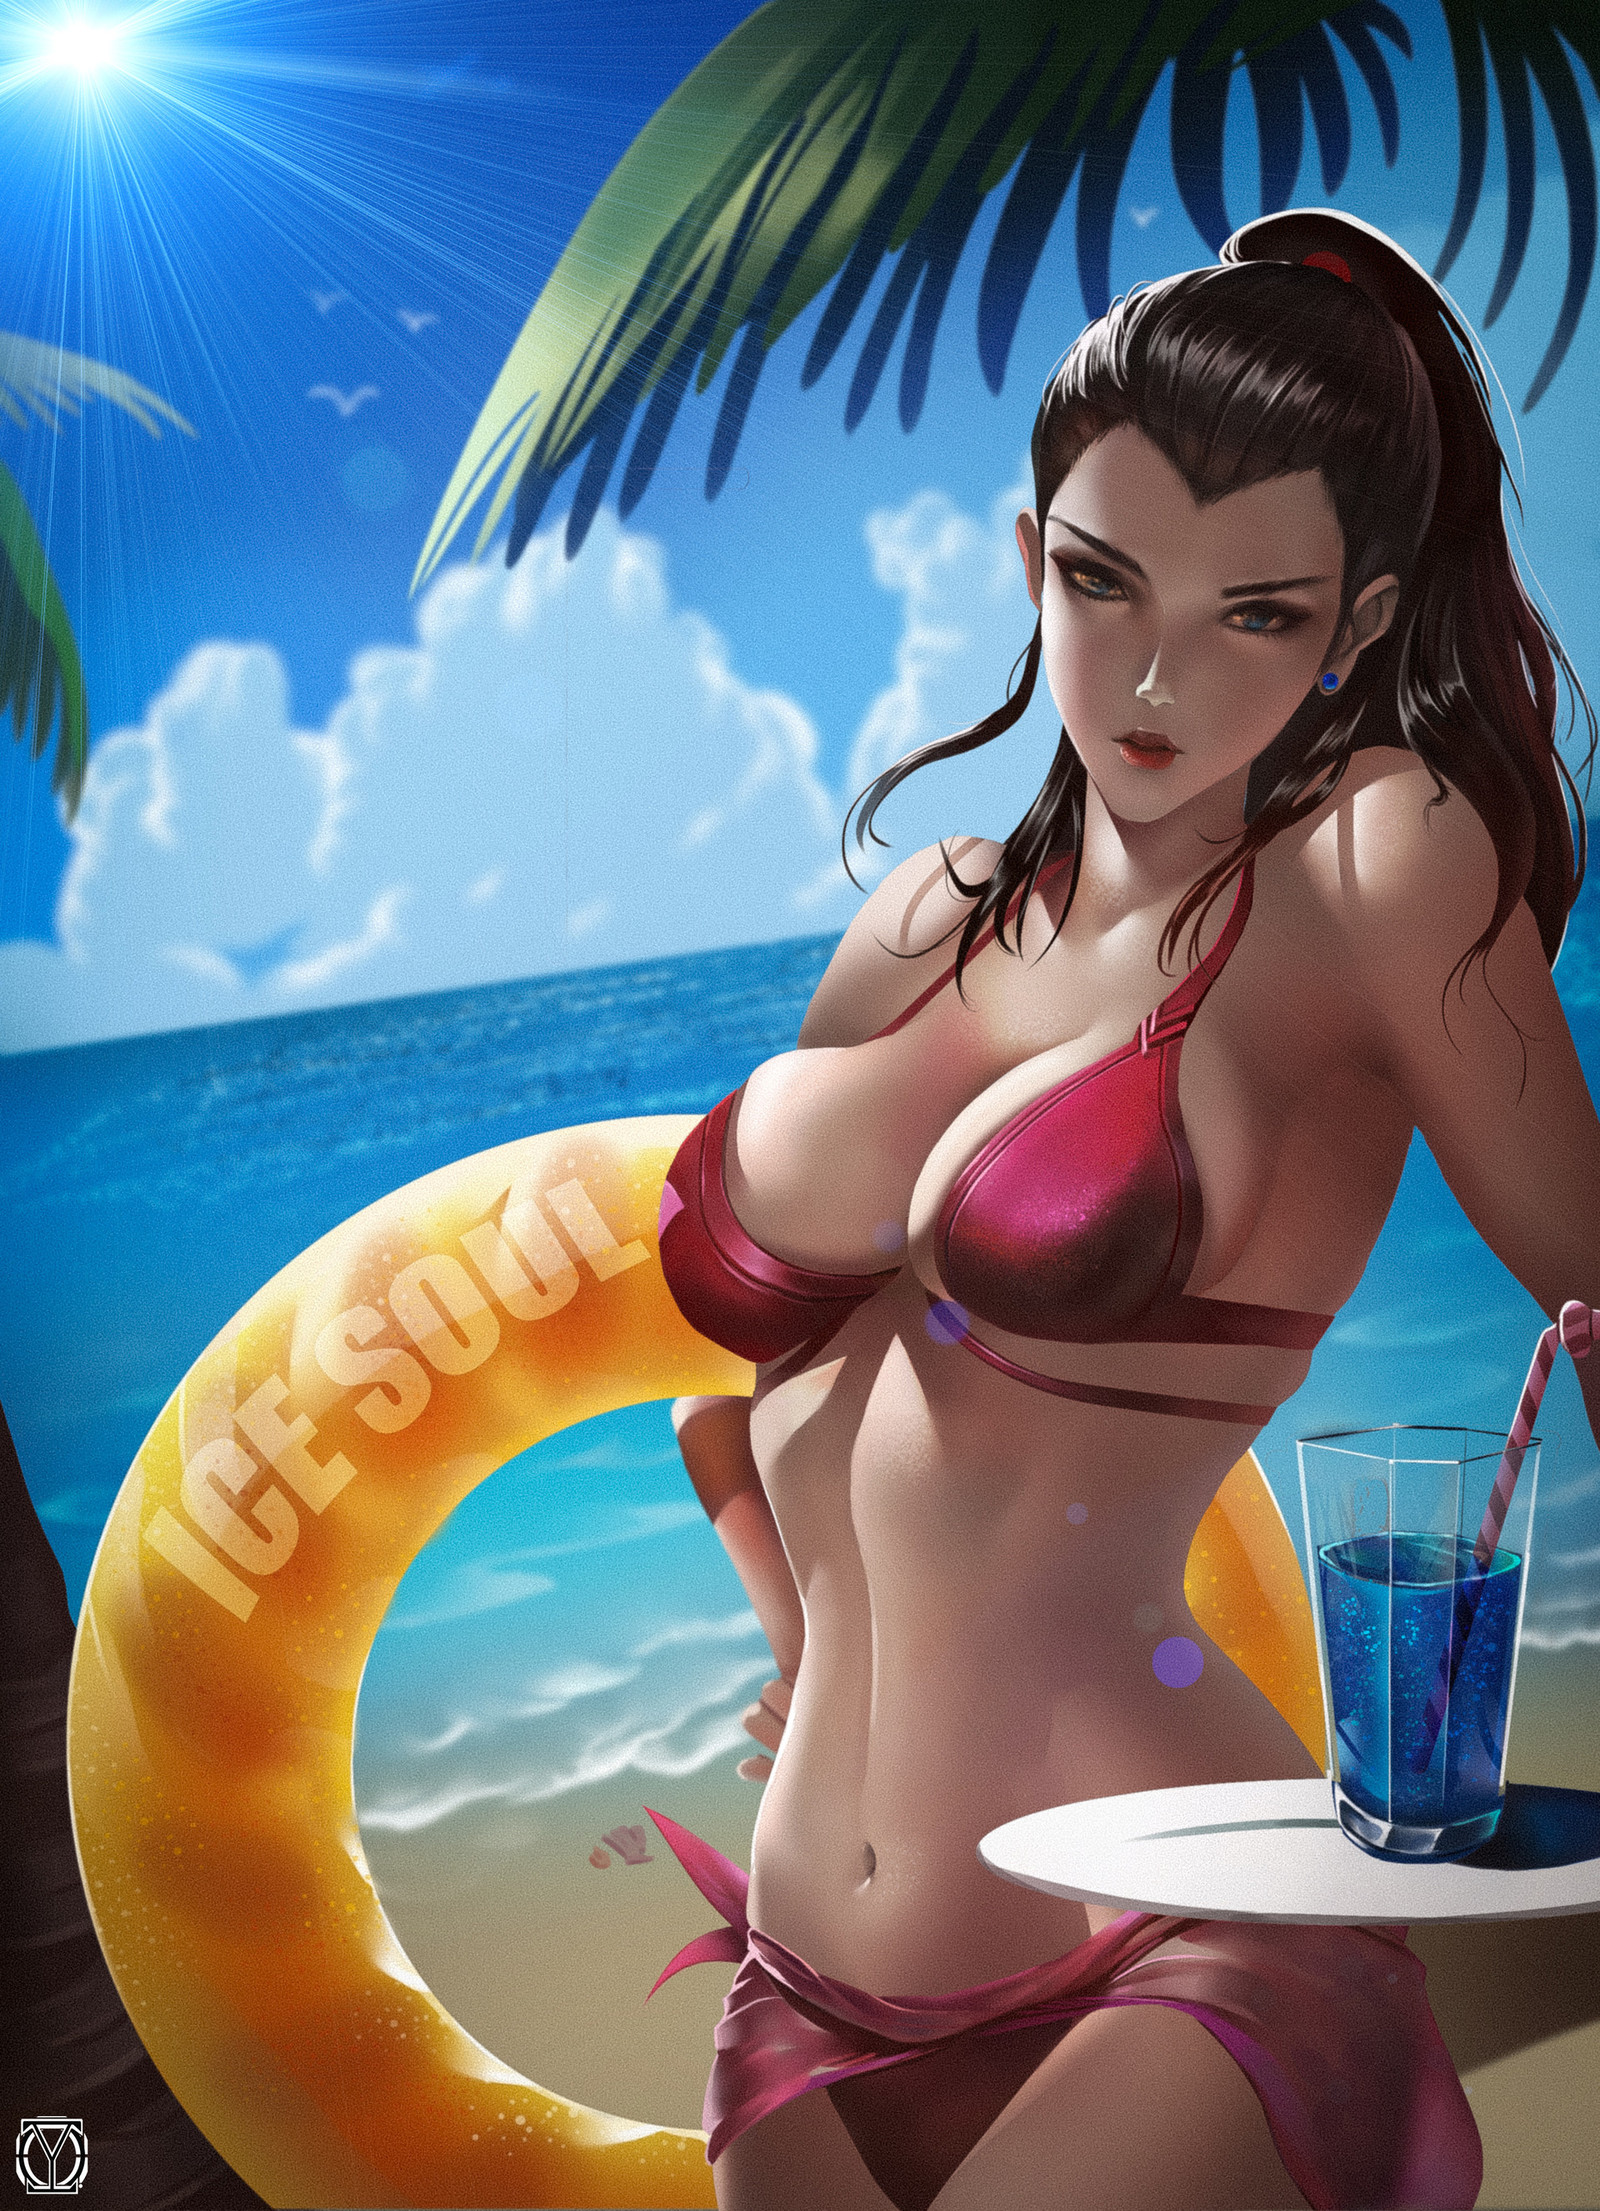 Taste of summer with Amelie Lacroix - Overwatch, Widowmaker, Amelie Lacroix, Widowmaker, Art, 